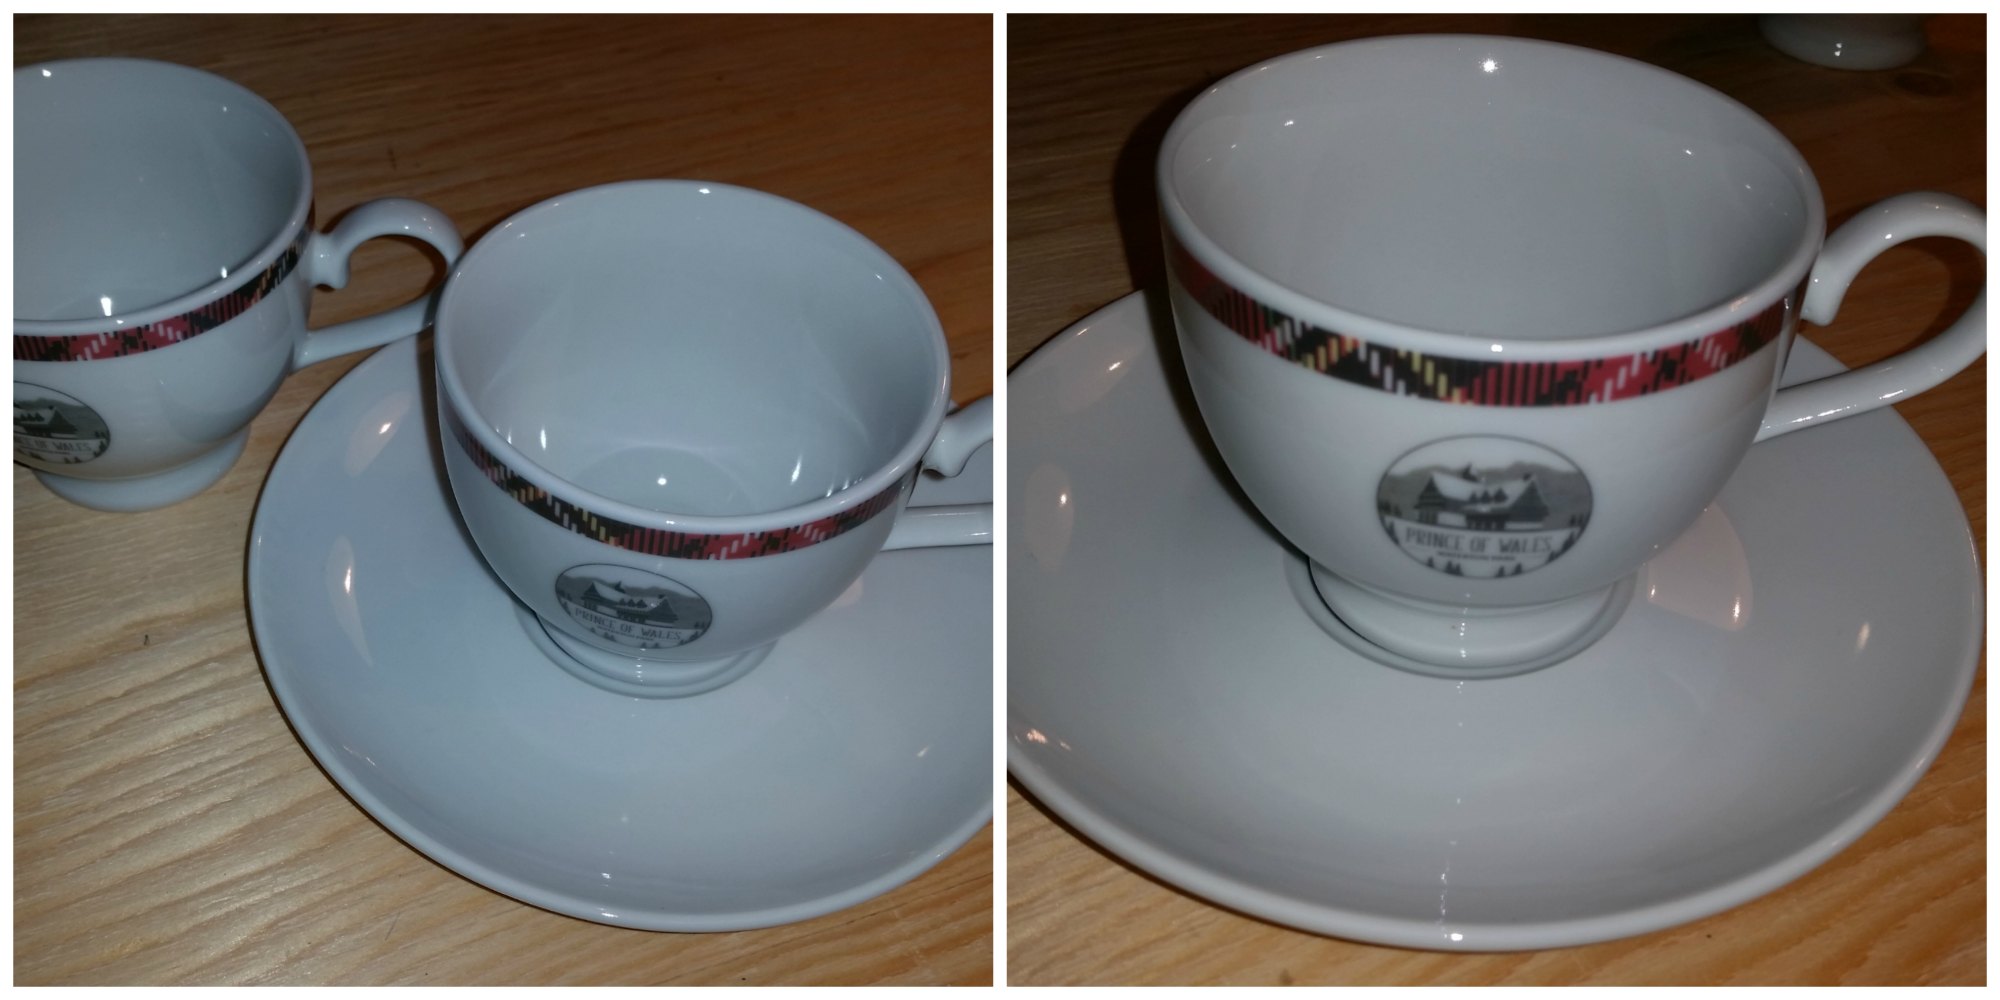 Custom Printed cups and saucers.